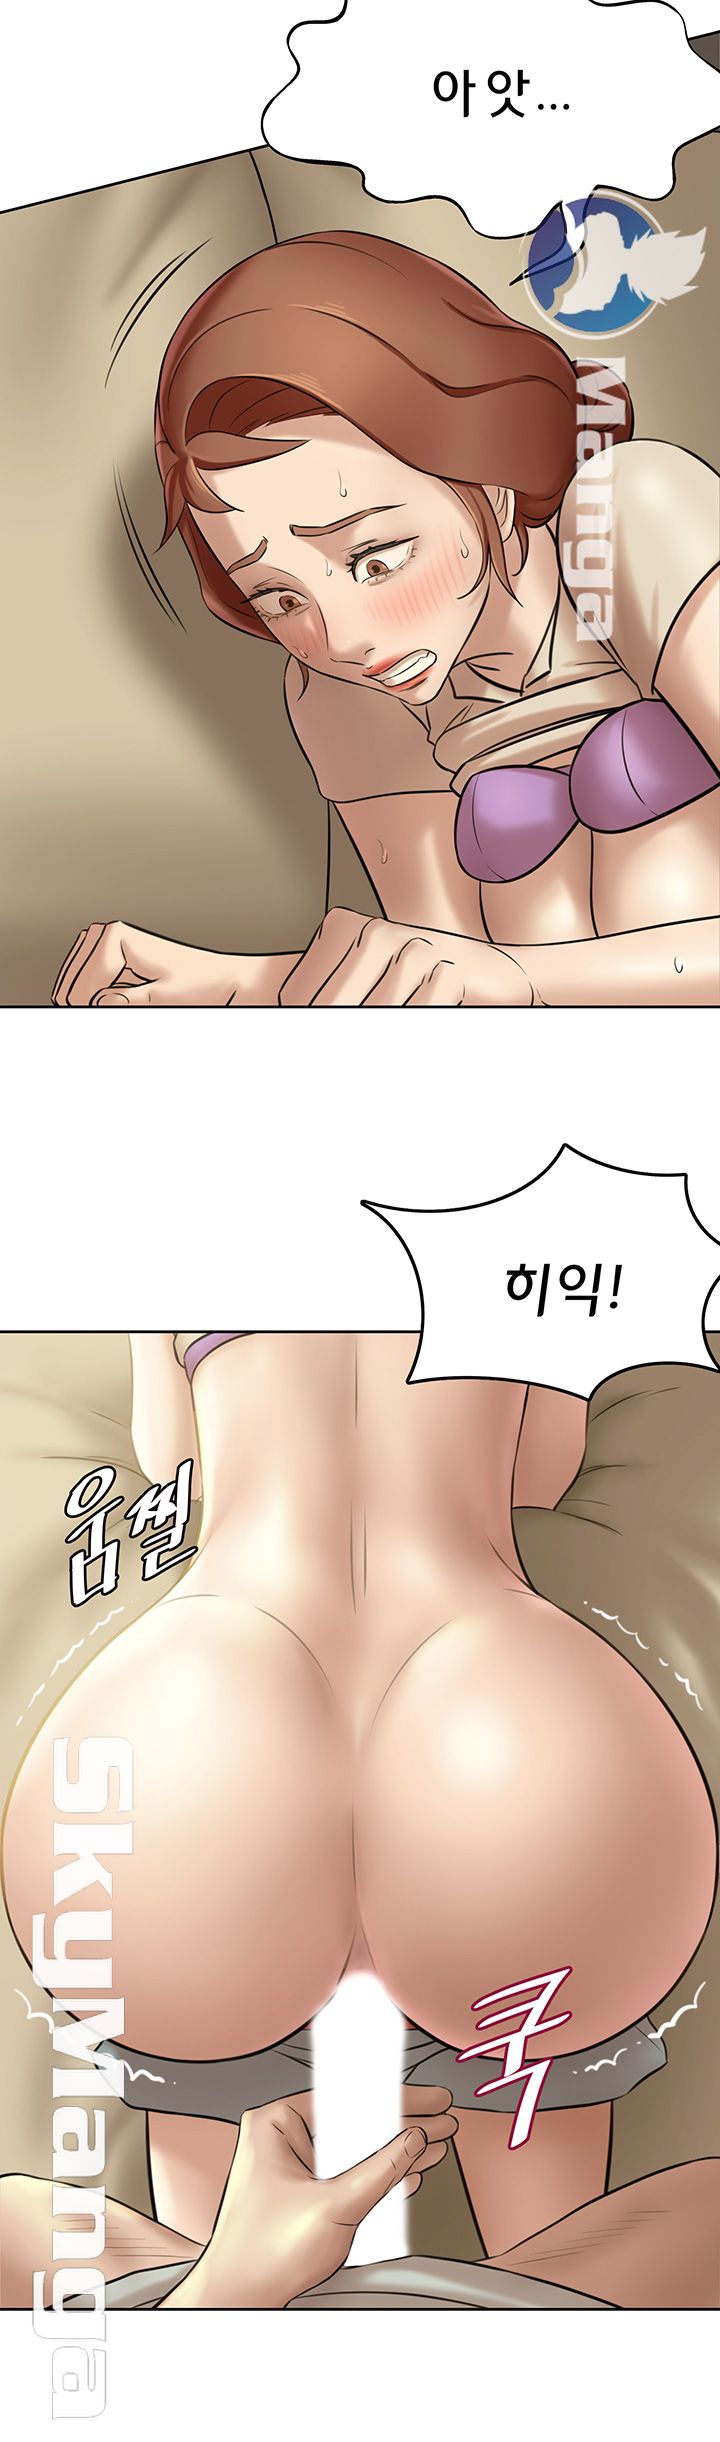 Panty Note Raw - Chapter 7 Page 7